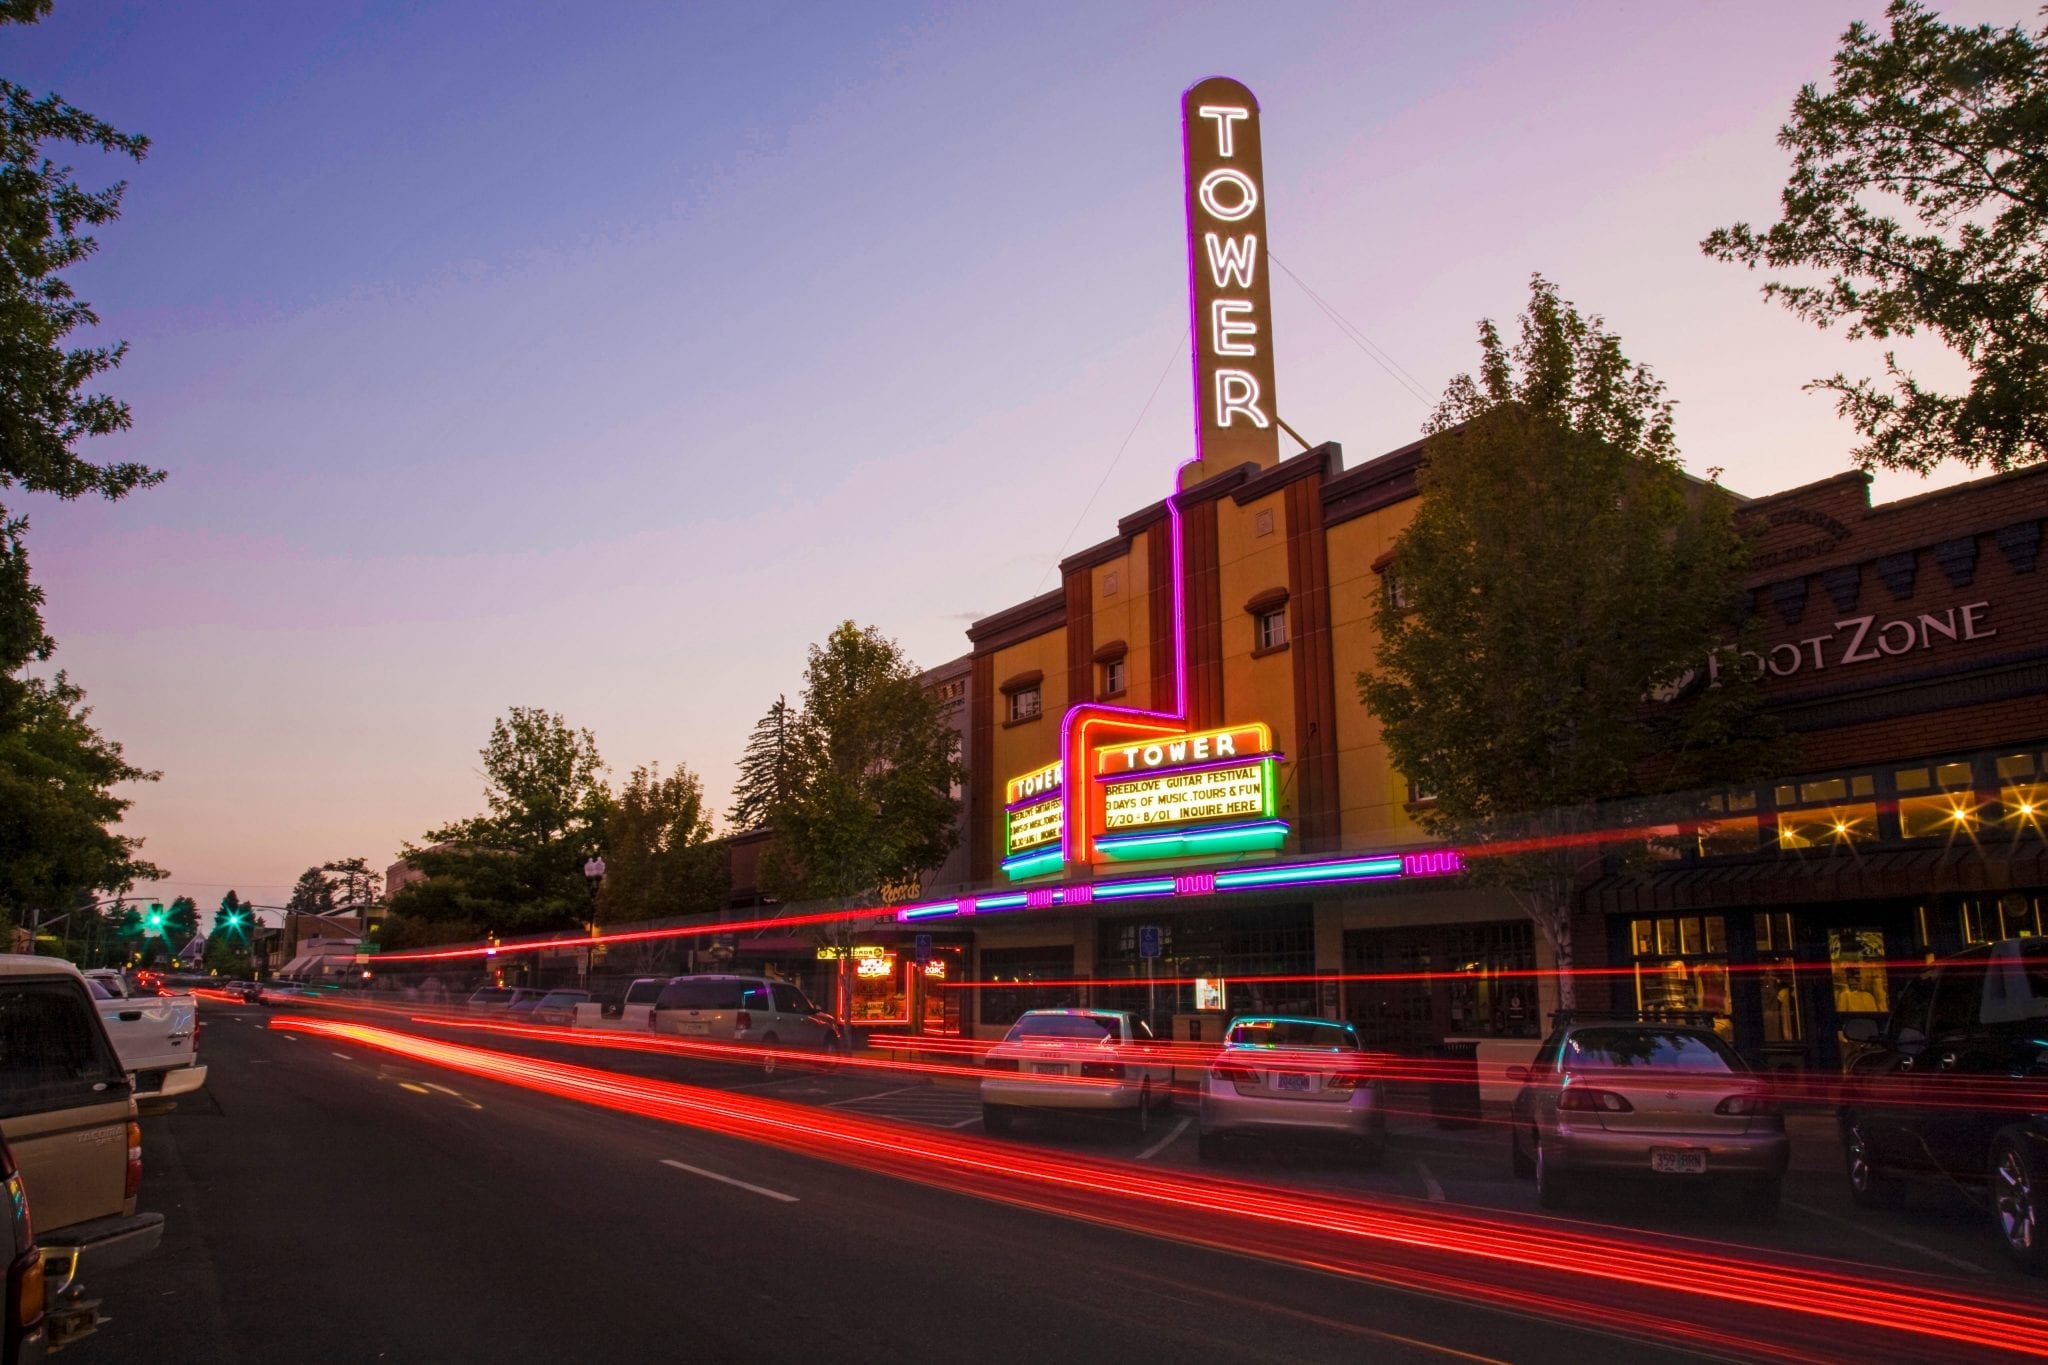 Historic Tower theater and shops on Wall Street in Downtown Bend Oregon.